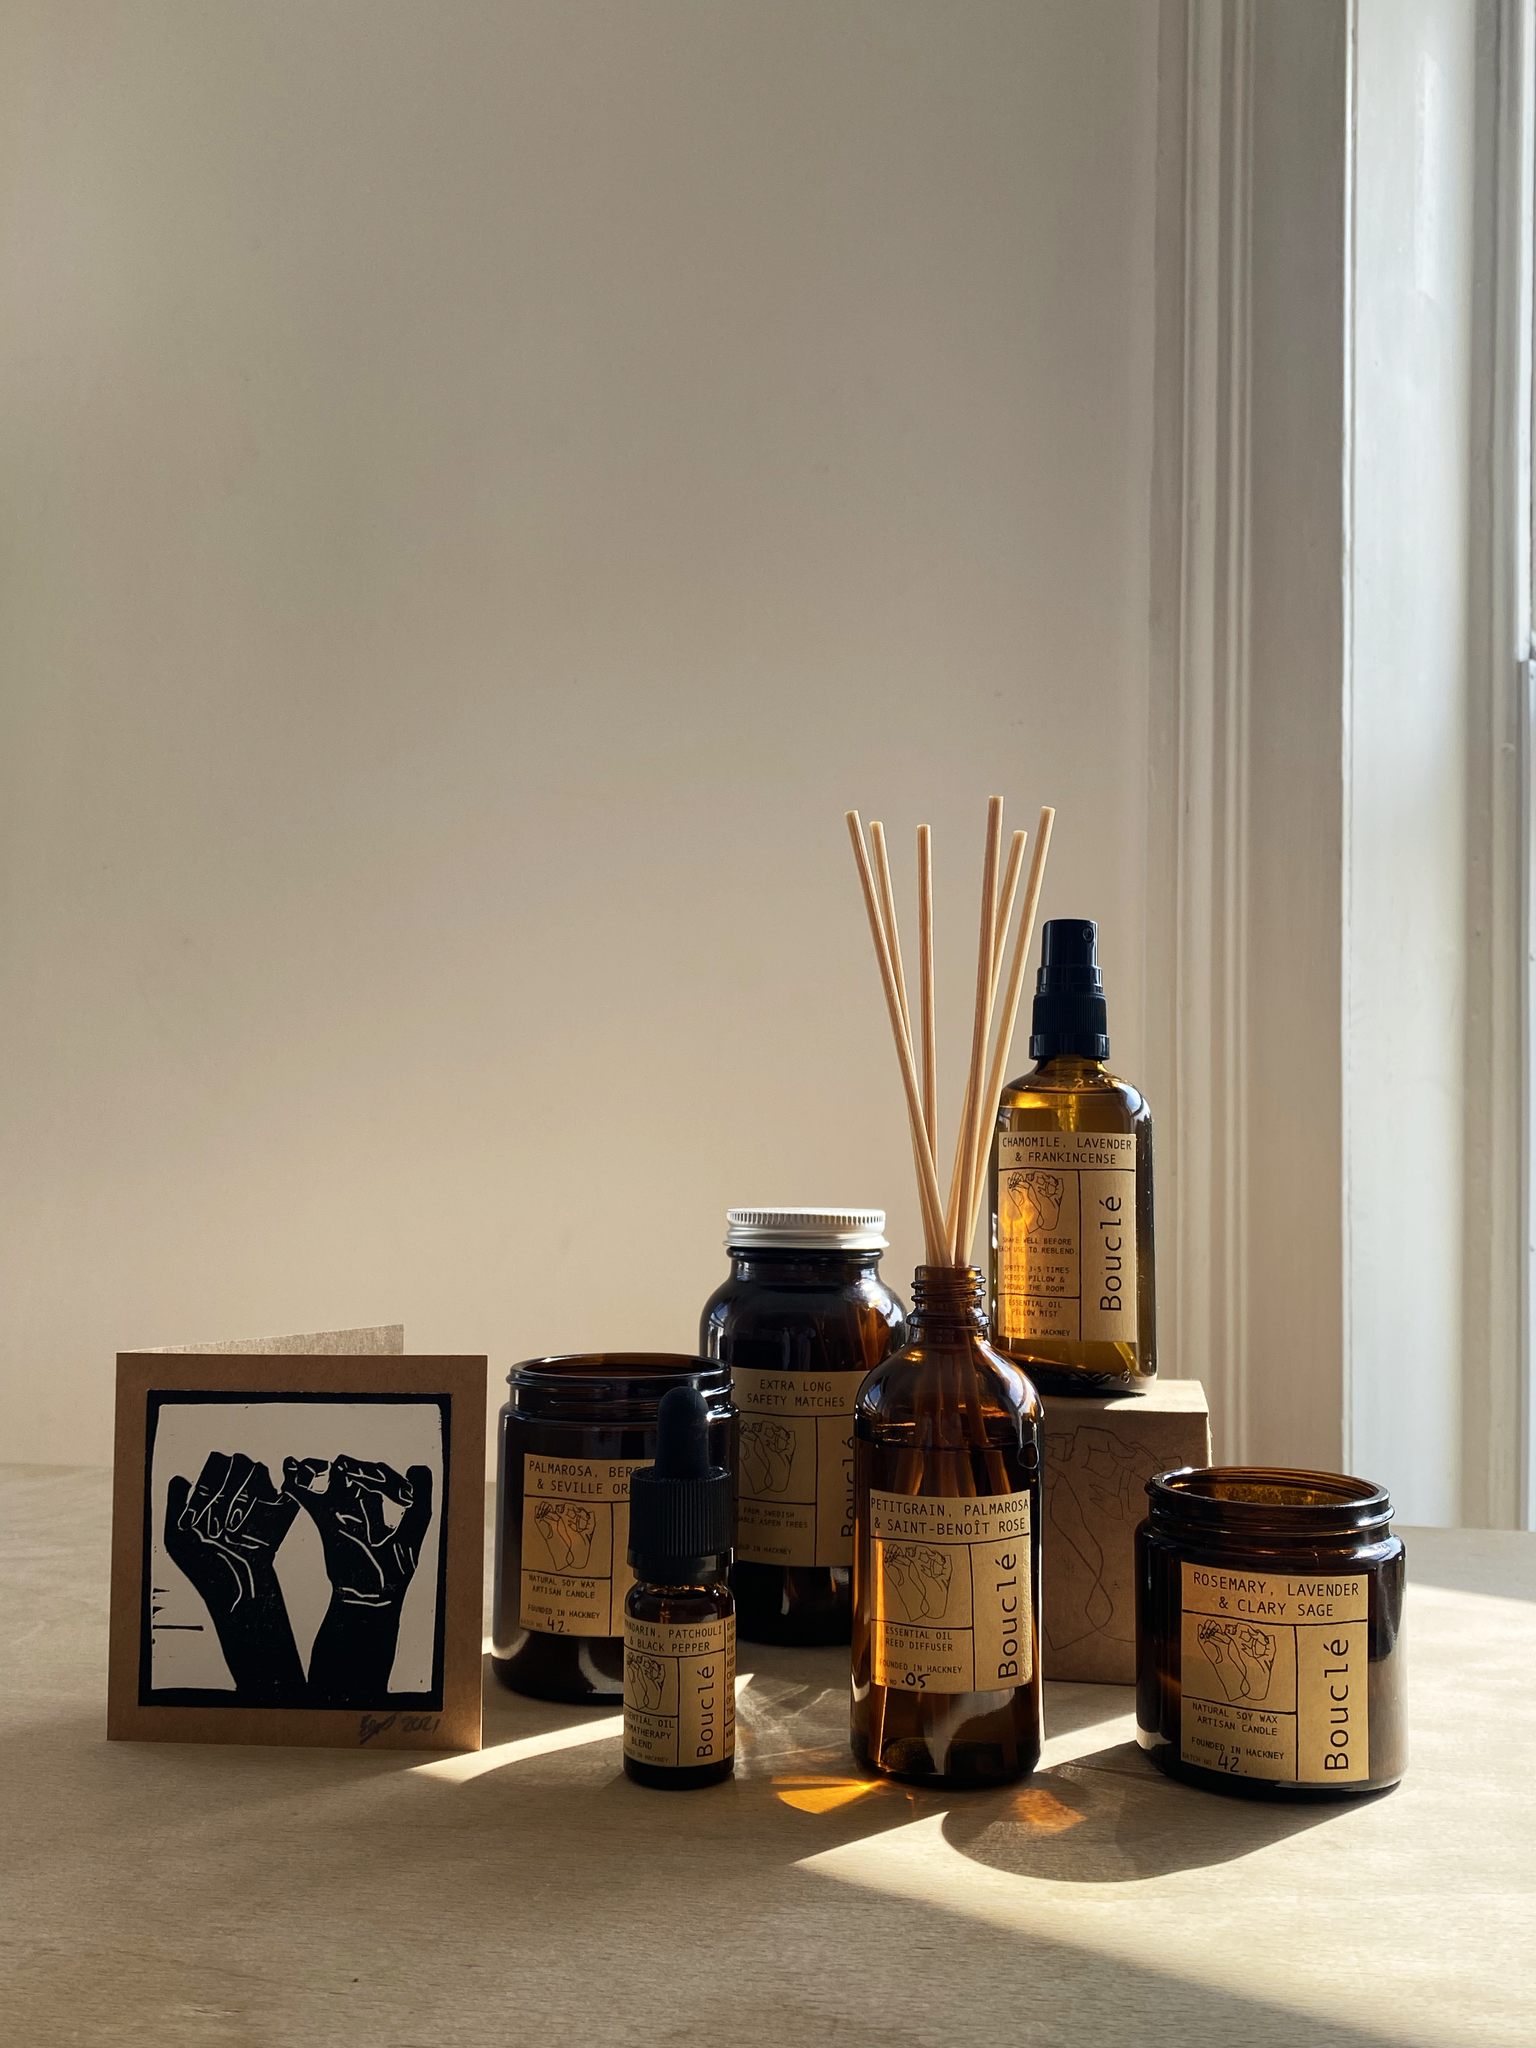 Selection of Bouclé all natural handpoured essential oil products made in Hackney for all natural home fragrance